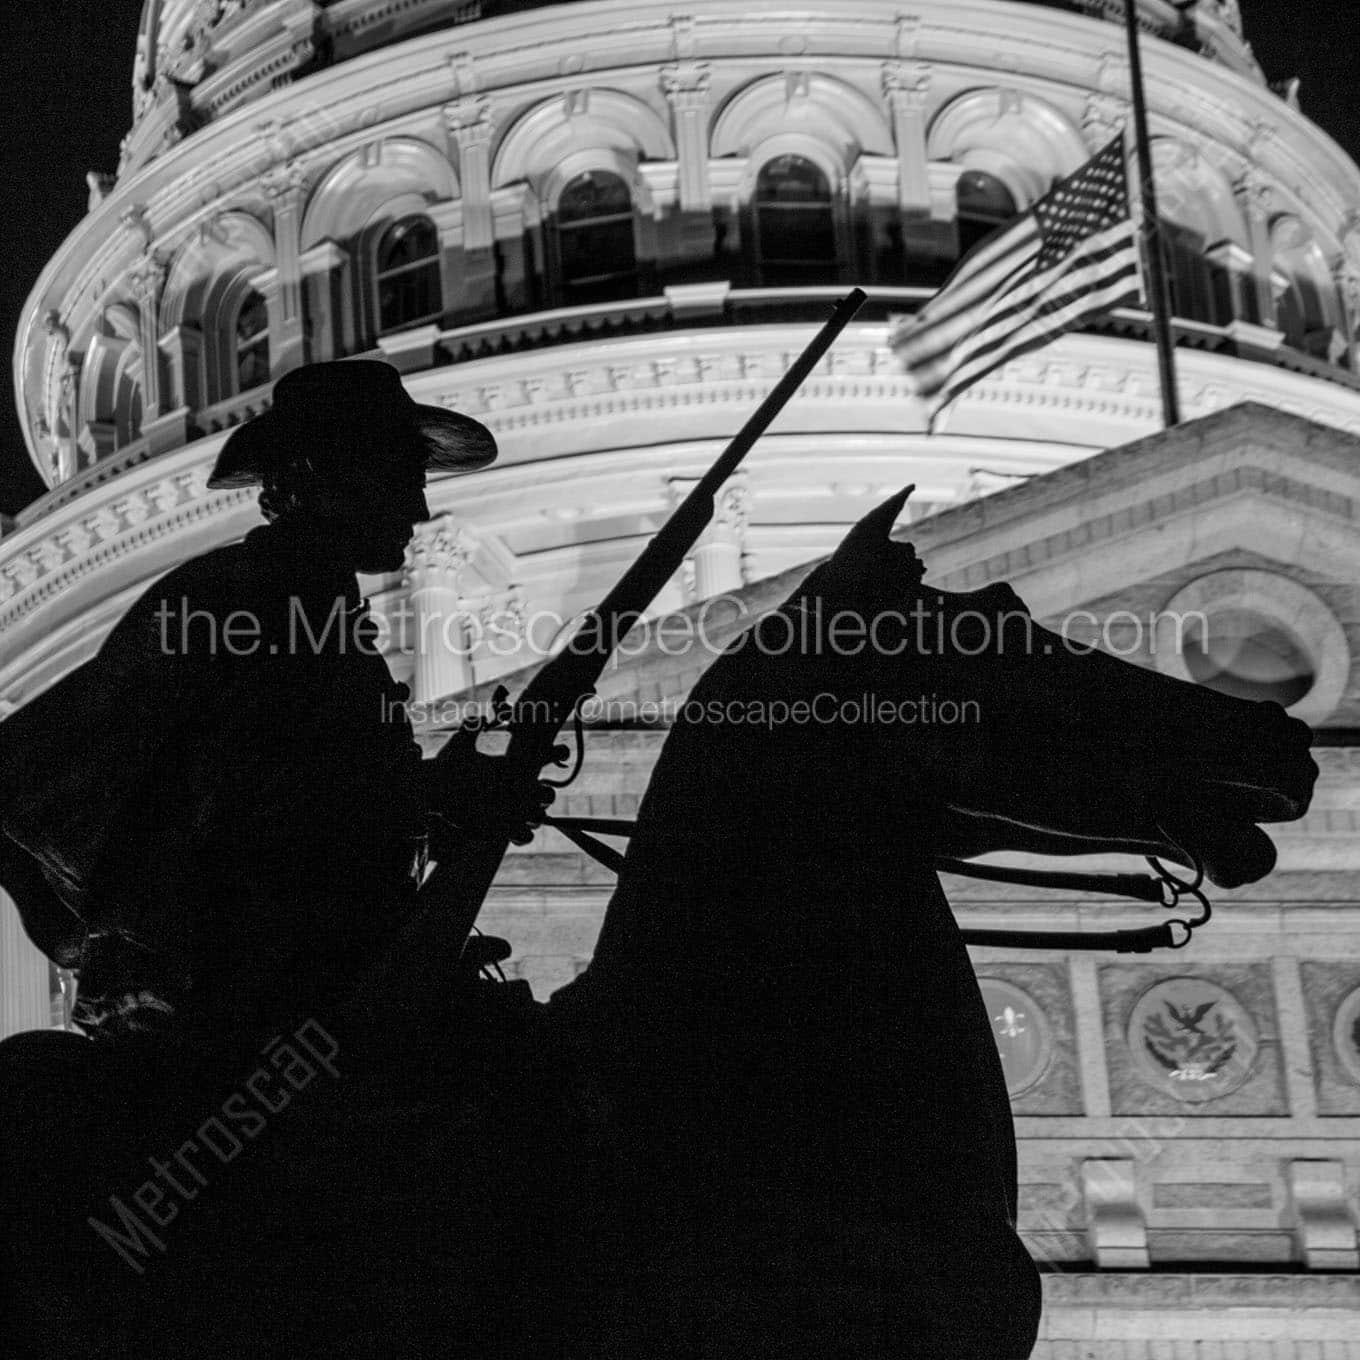 texas ranger statue with texas statehouse behind Black & White Wall Art